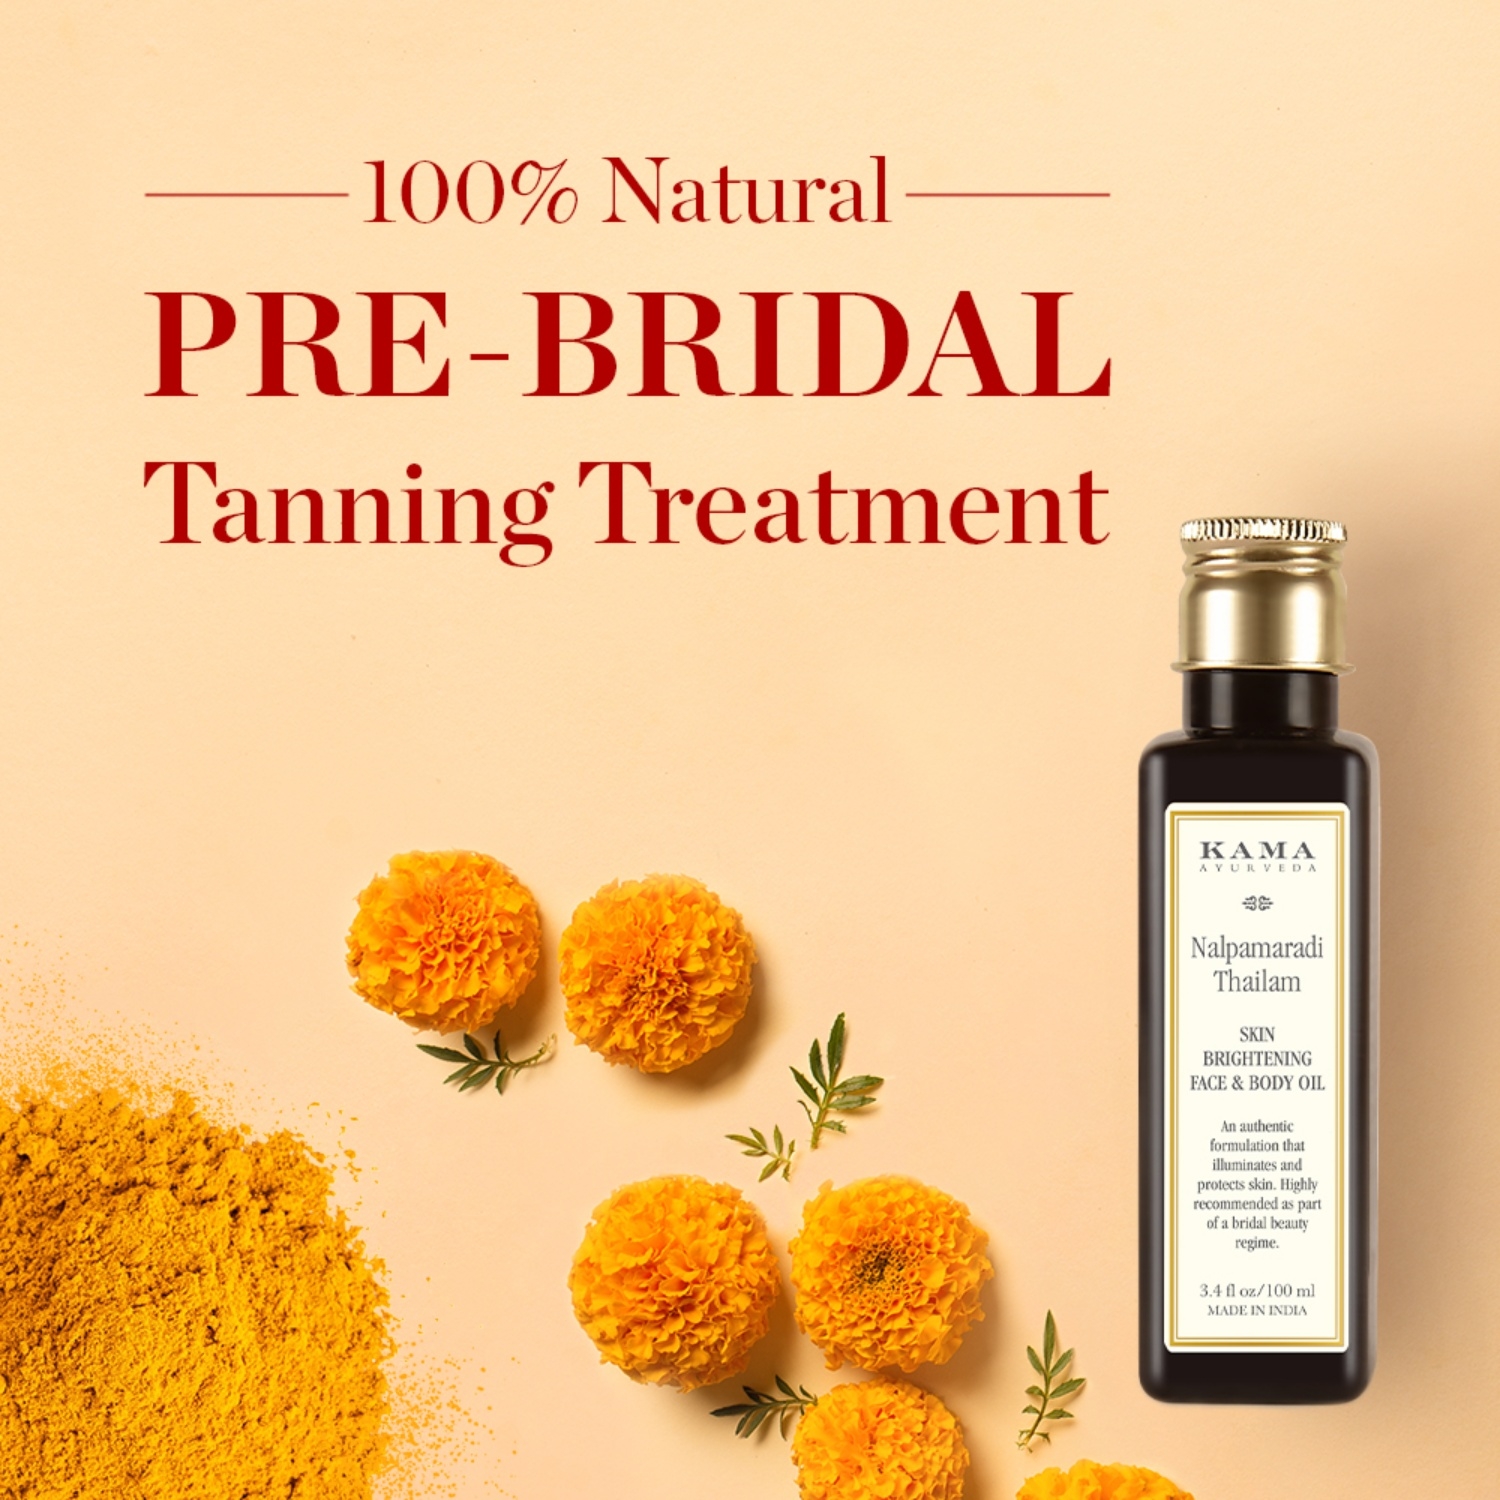 Bringadi Intensive Hair Treatment 8ml Extra Virgin Organic Coconut Oil  200ml  the best price and delivery  Globally